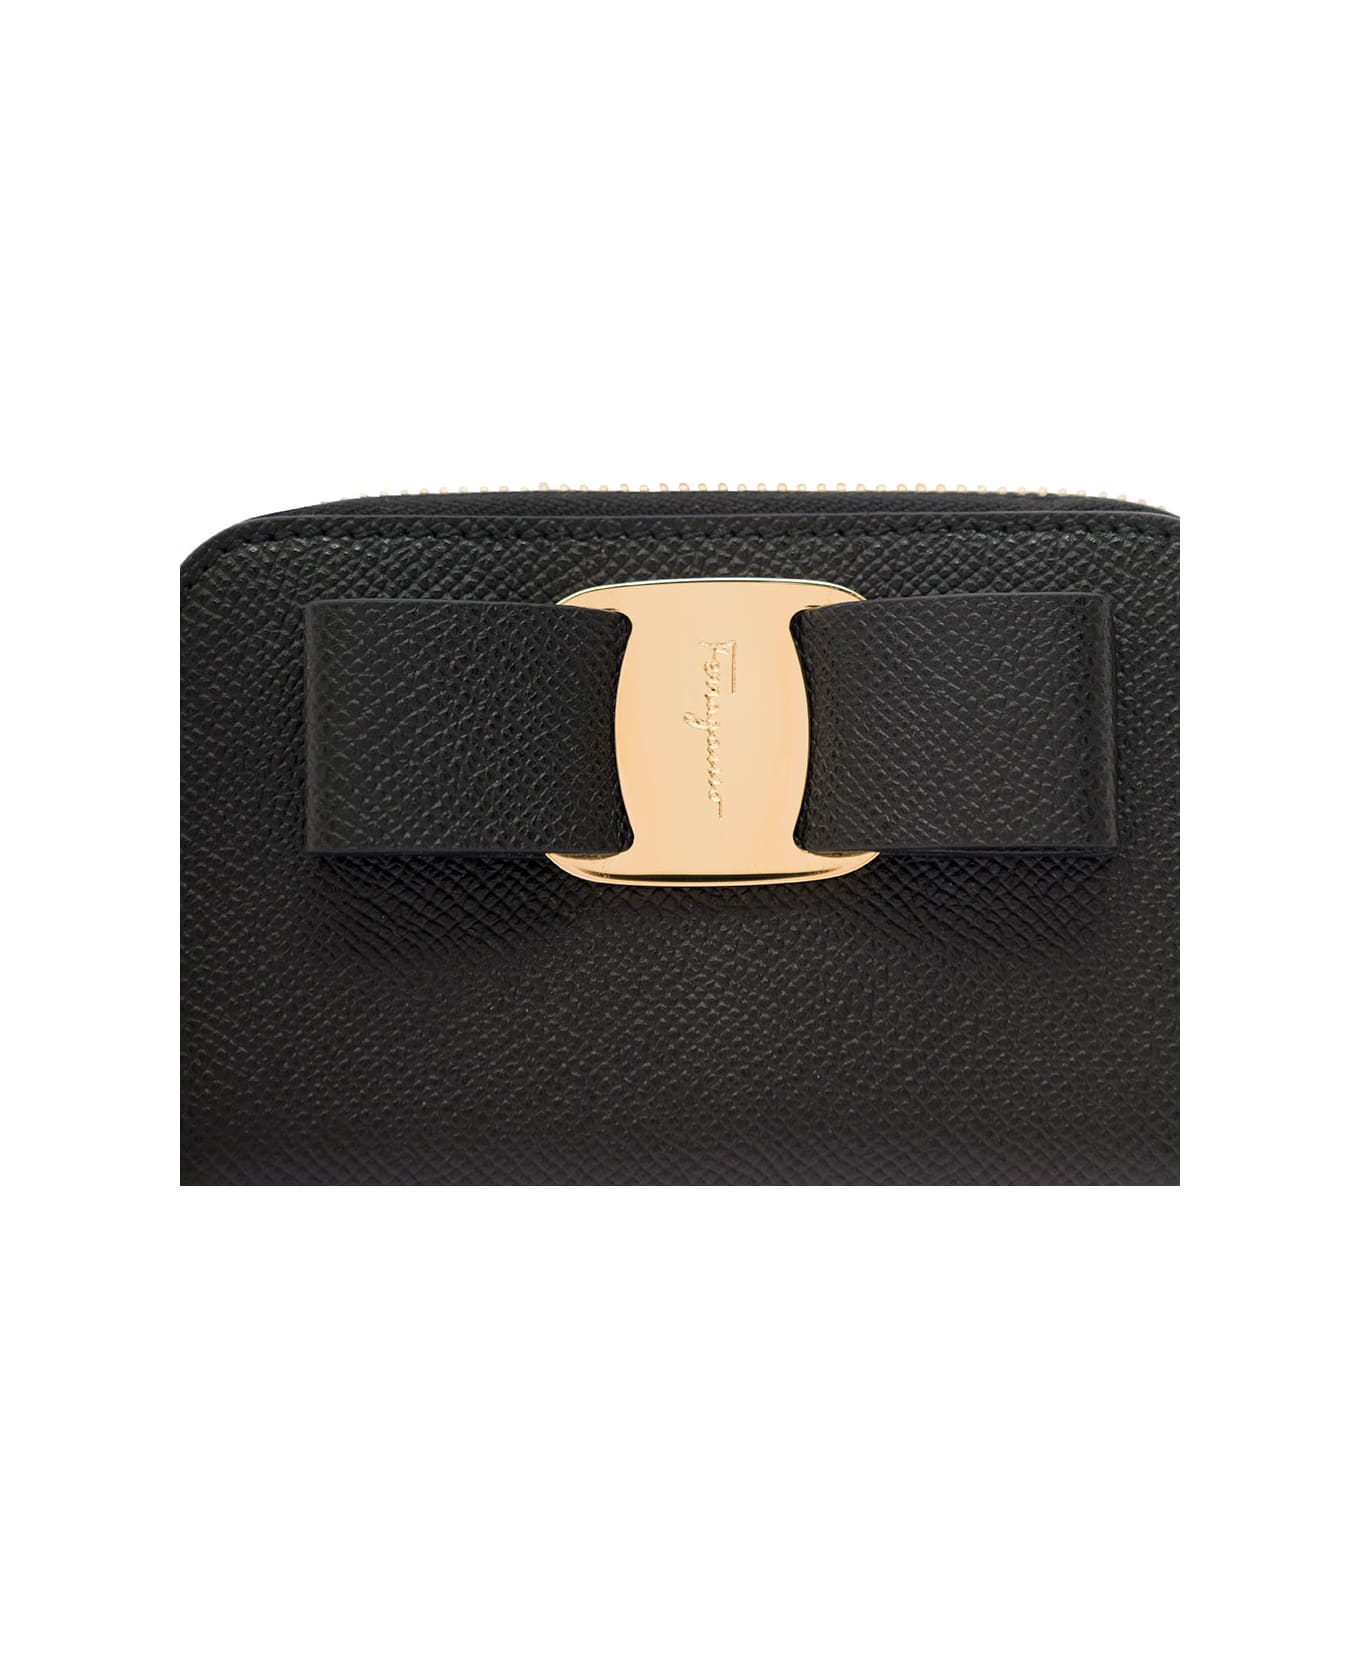 Ferragamo 'vara' Black Card-holder With Bow And Logo Detail In Hammered Leather Woman - Black